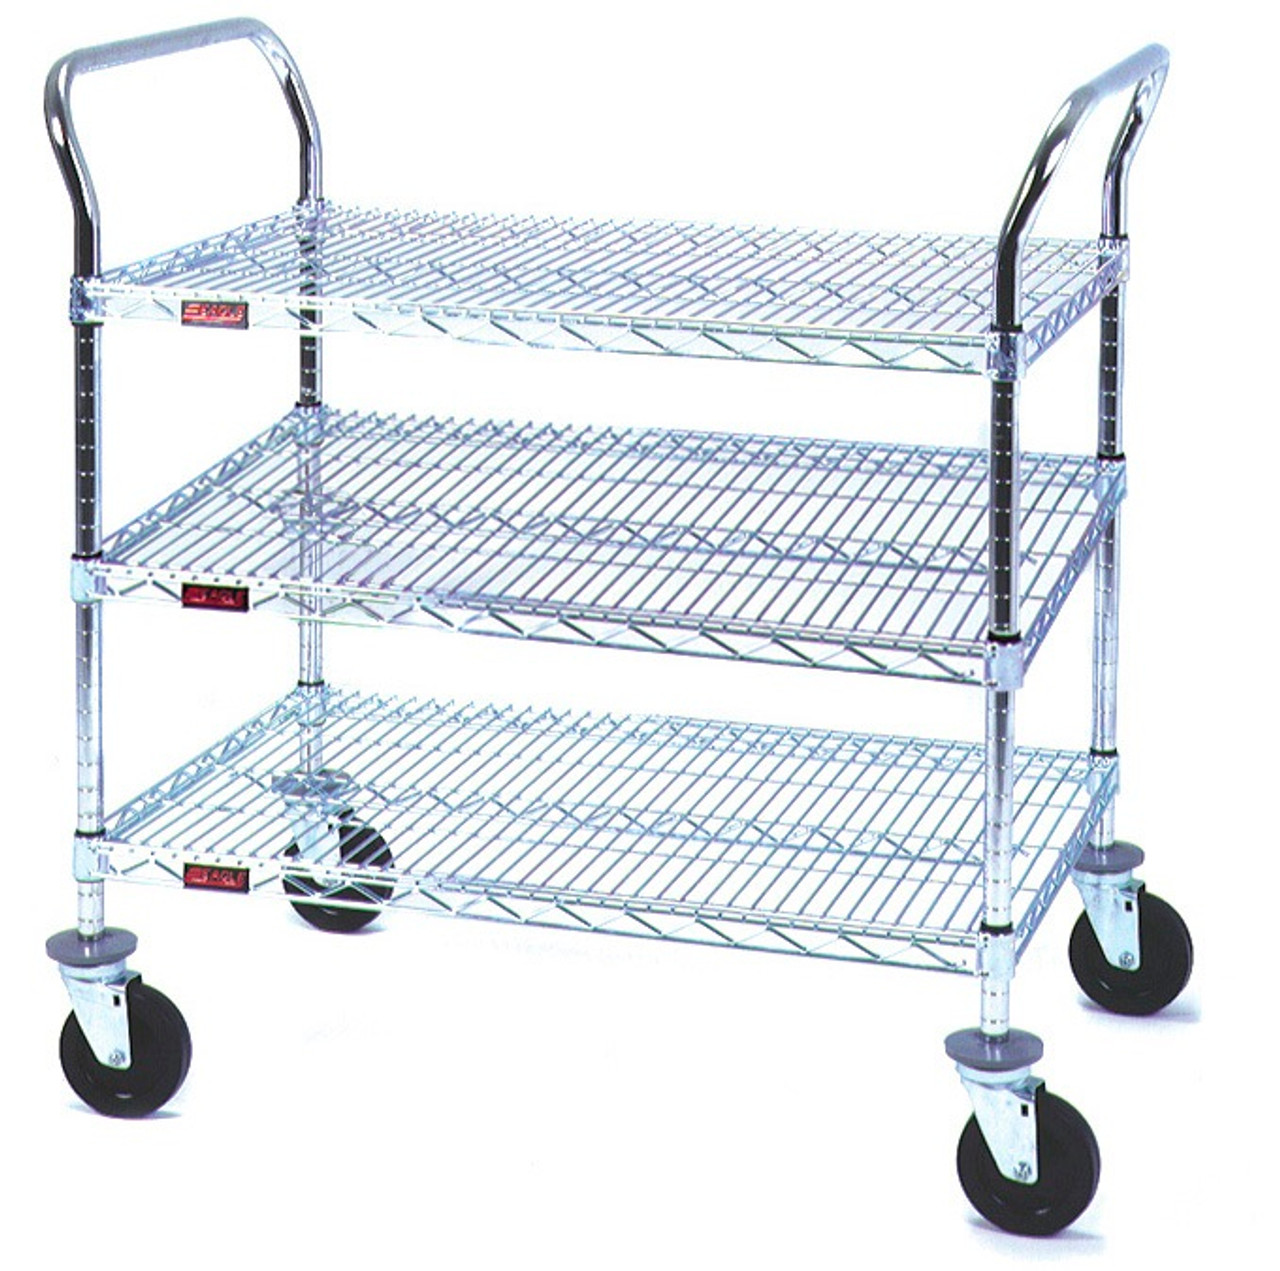 Utility Carts: 800 LBS Capacity, Casters, 3 Wire Shelves, Stainless Steel,  EA-U3-S